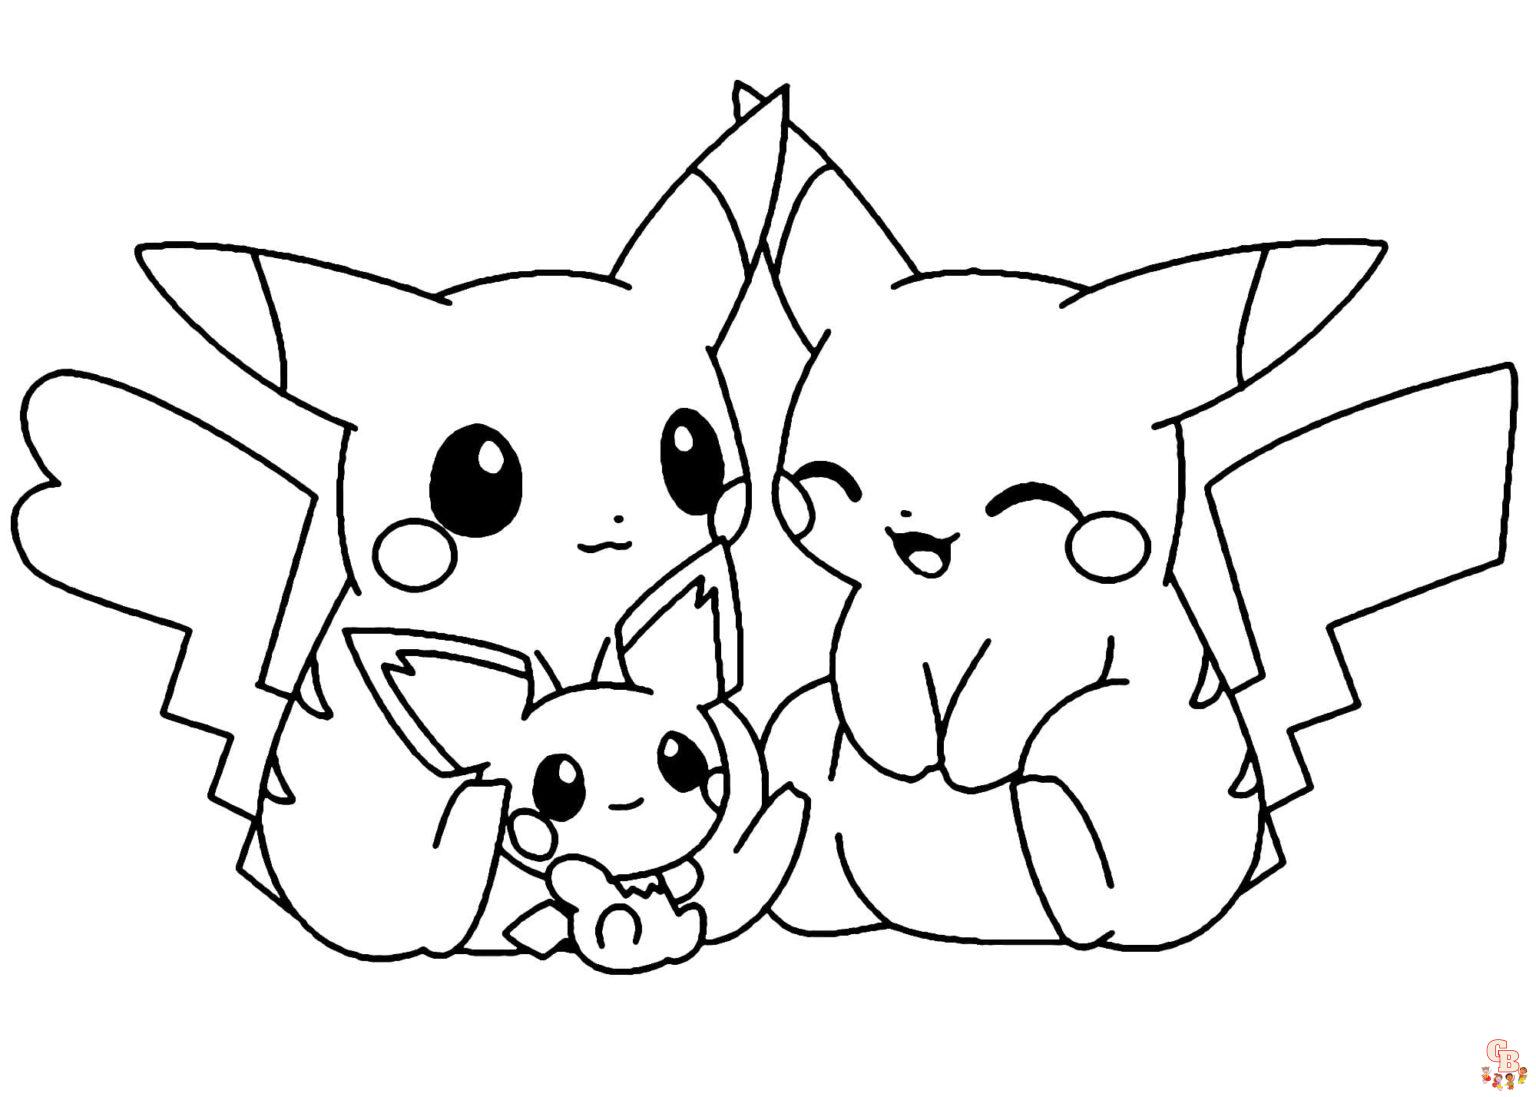 Cute Pokemon coloring pages 4 1